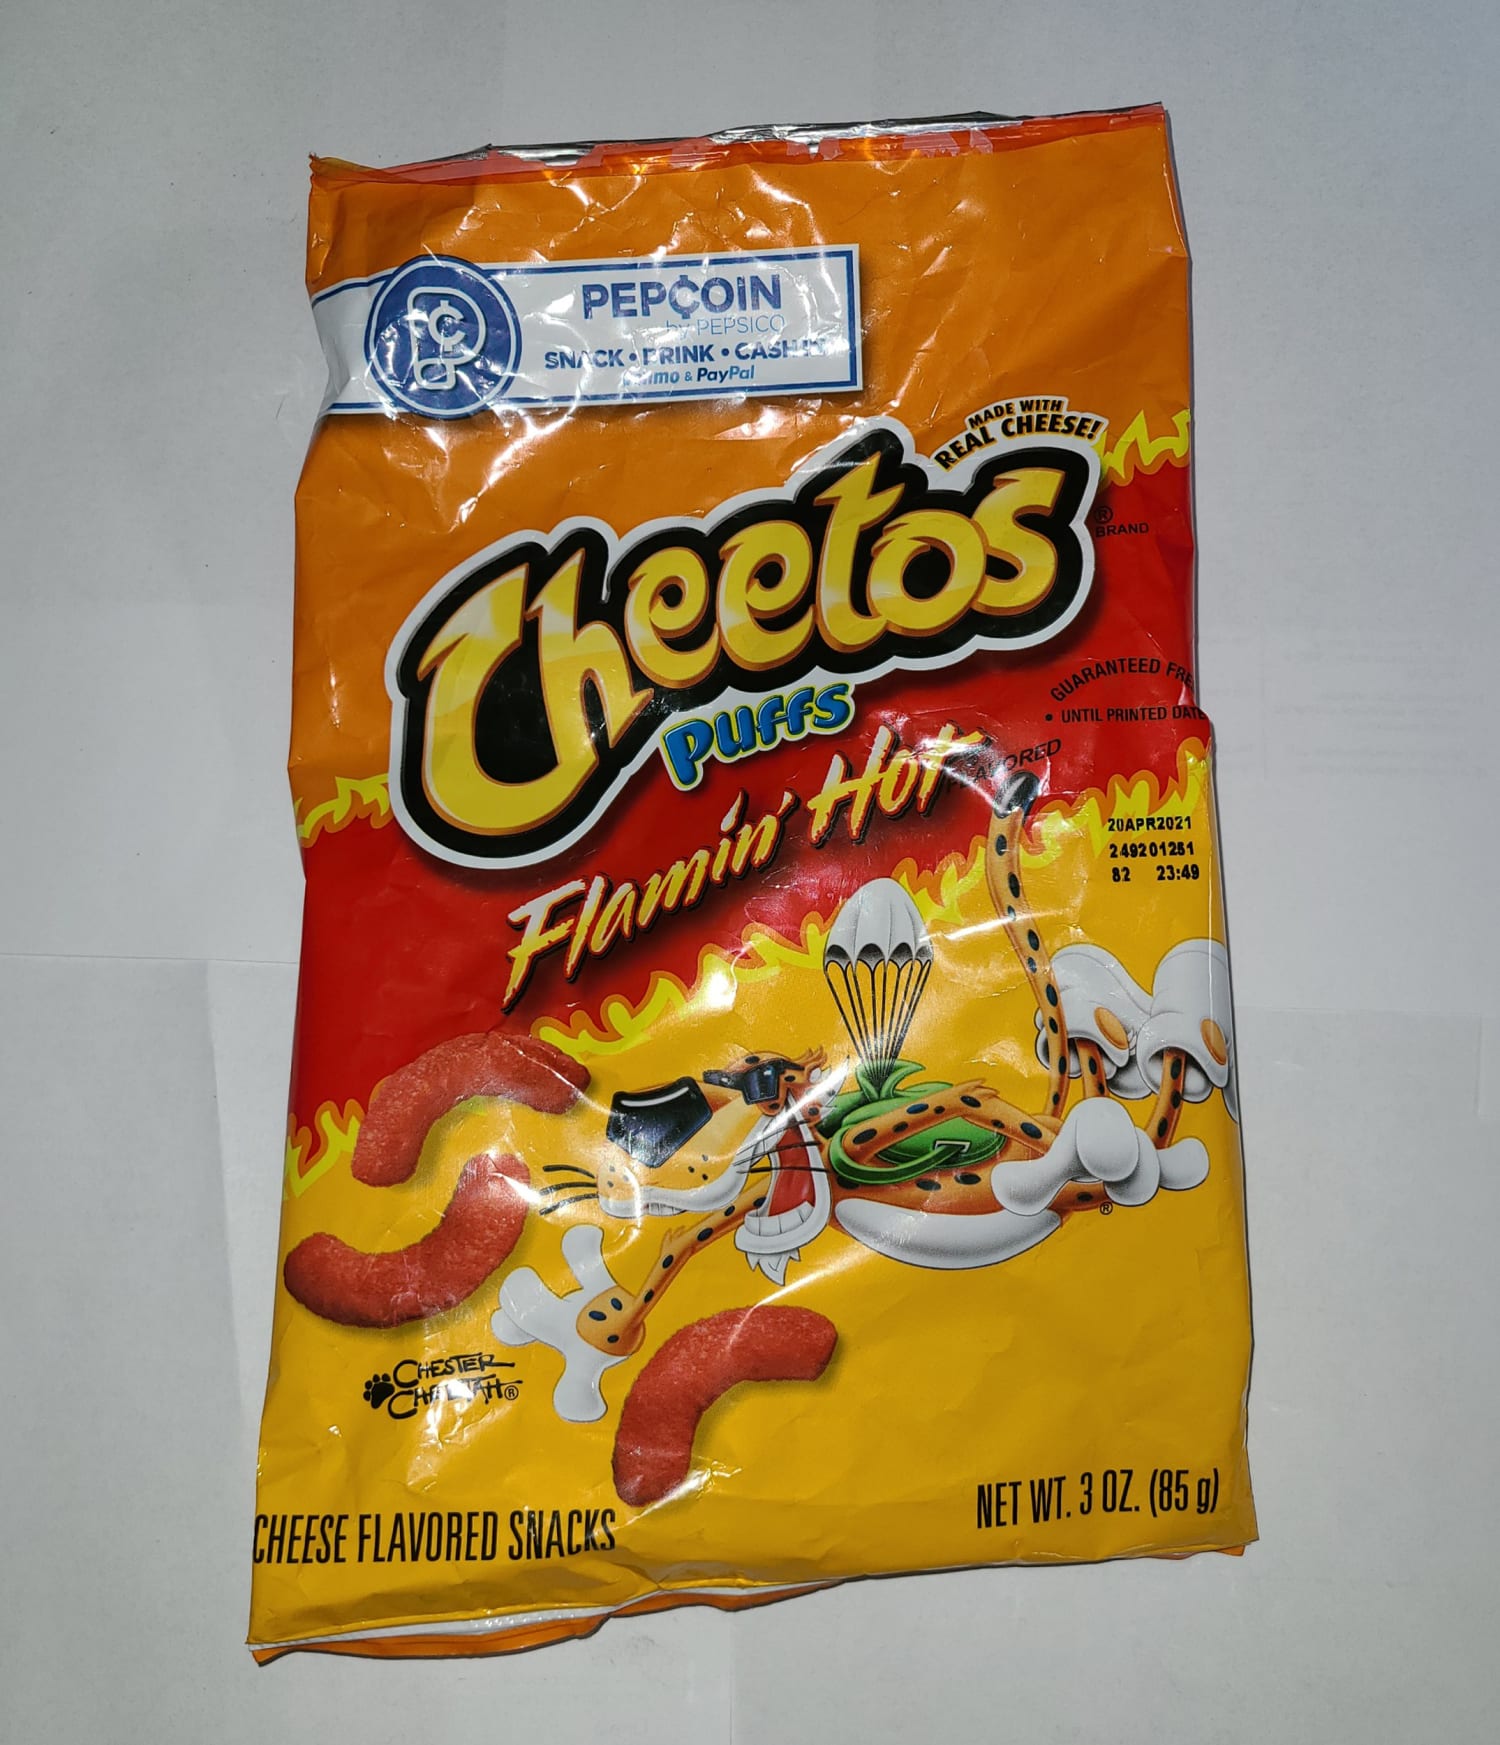 Montana dad claims 6-year-old found bullet in Cheetos bag